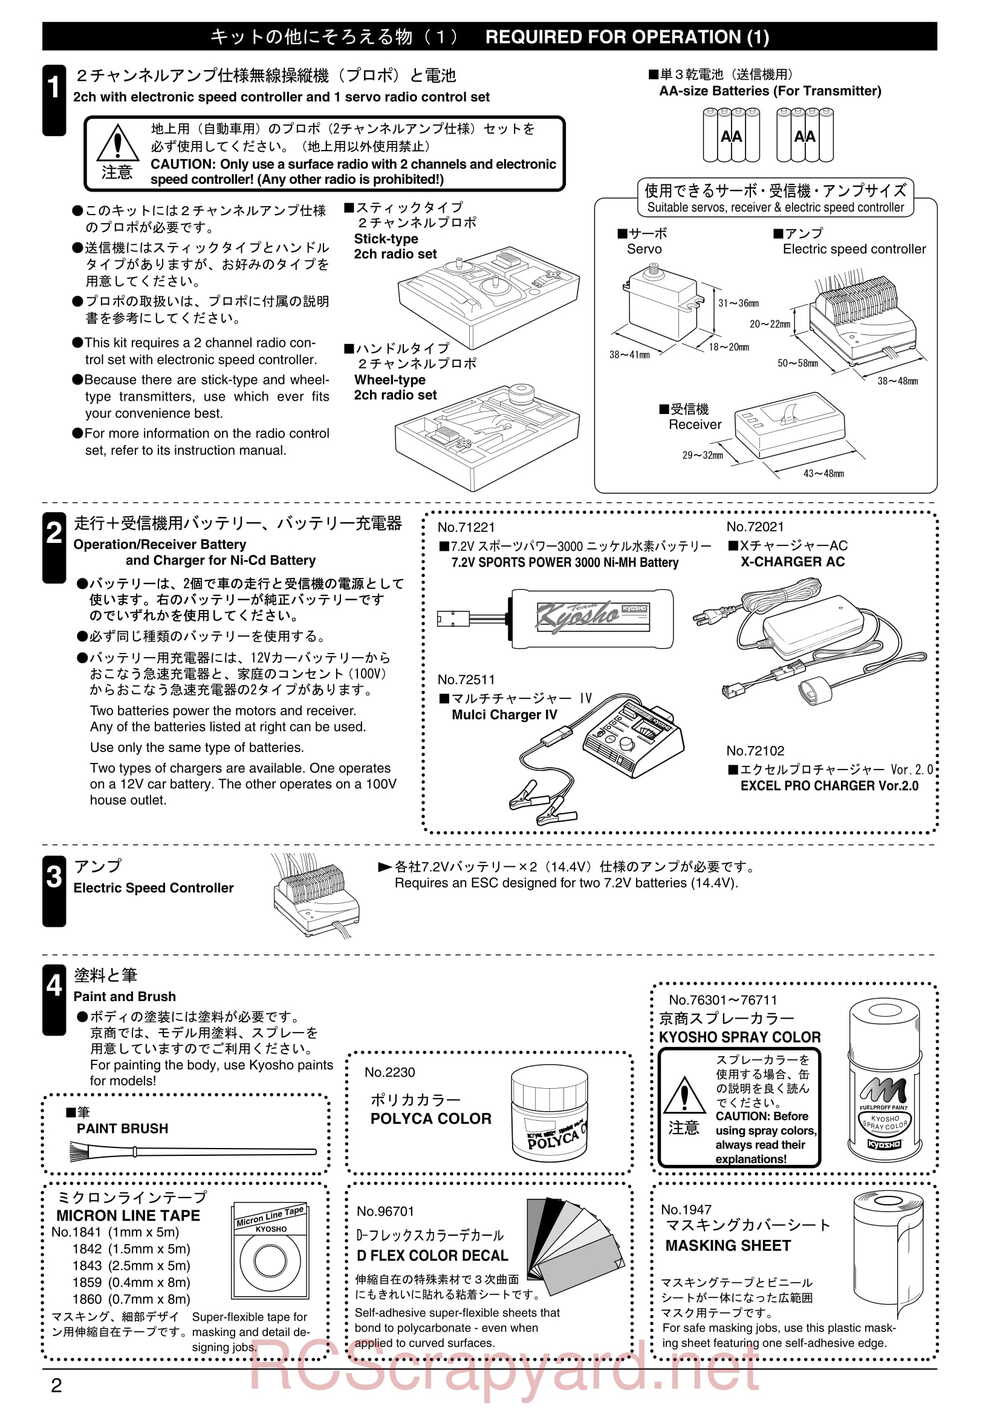 Kyosho - 30522b - Twin-Forcec-SP - Manual - Page 02